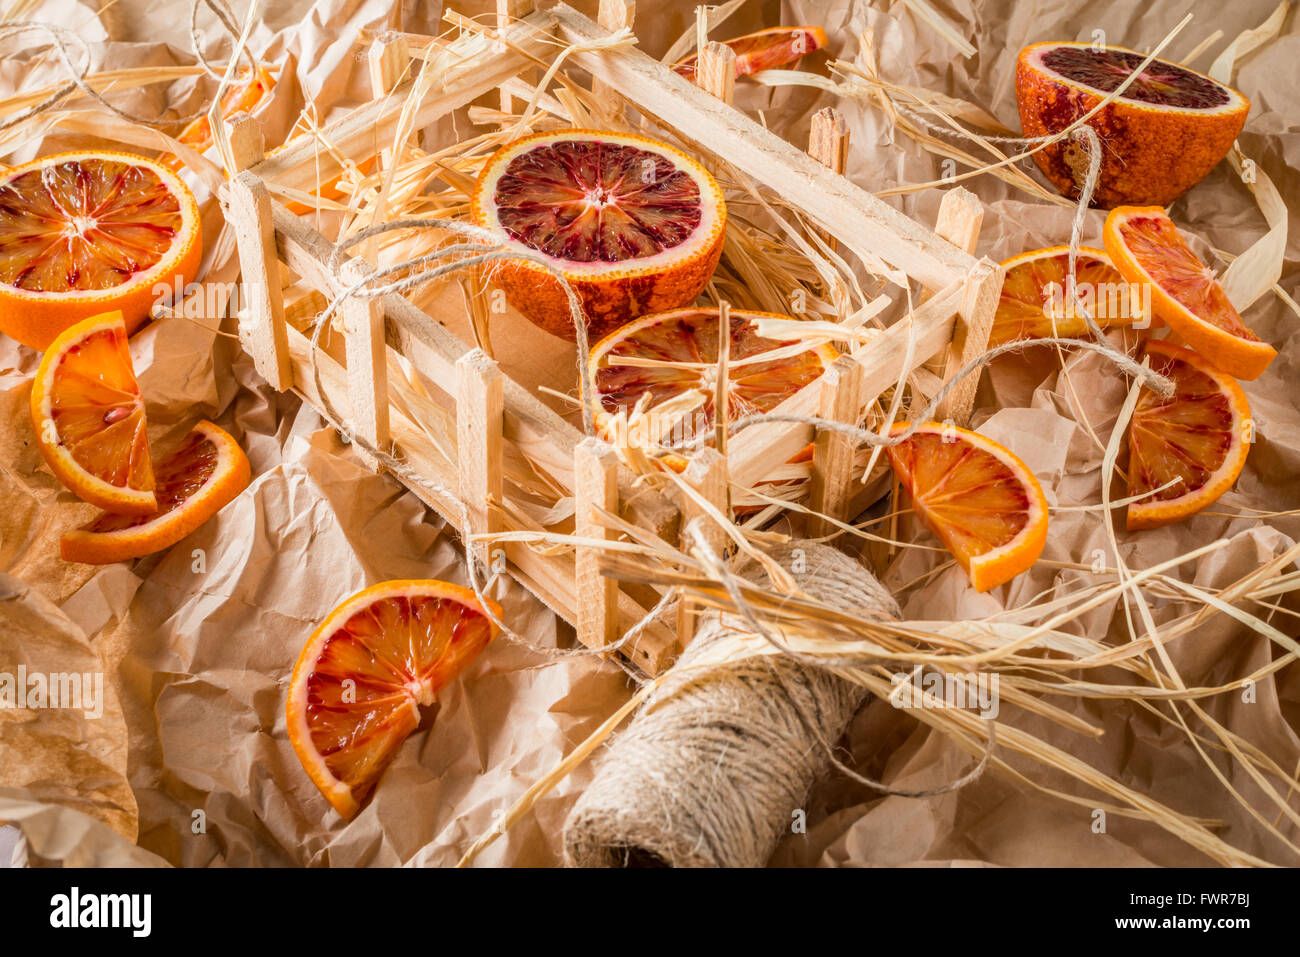 Blood oranges on wrapping paper with string Stock Photo